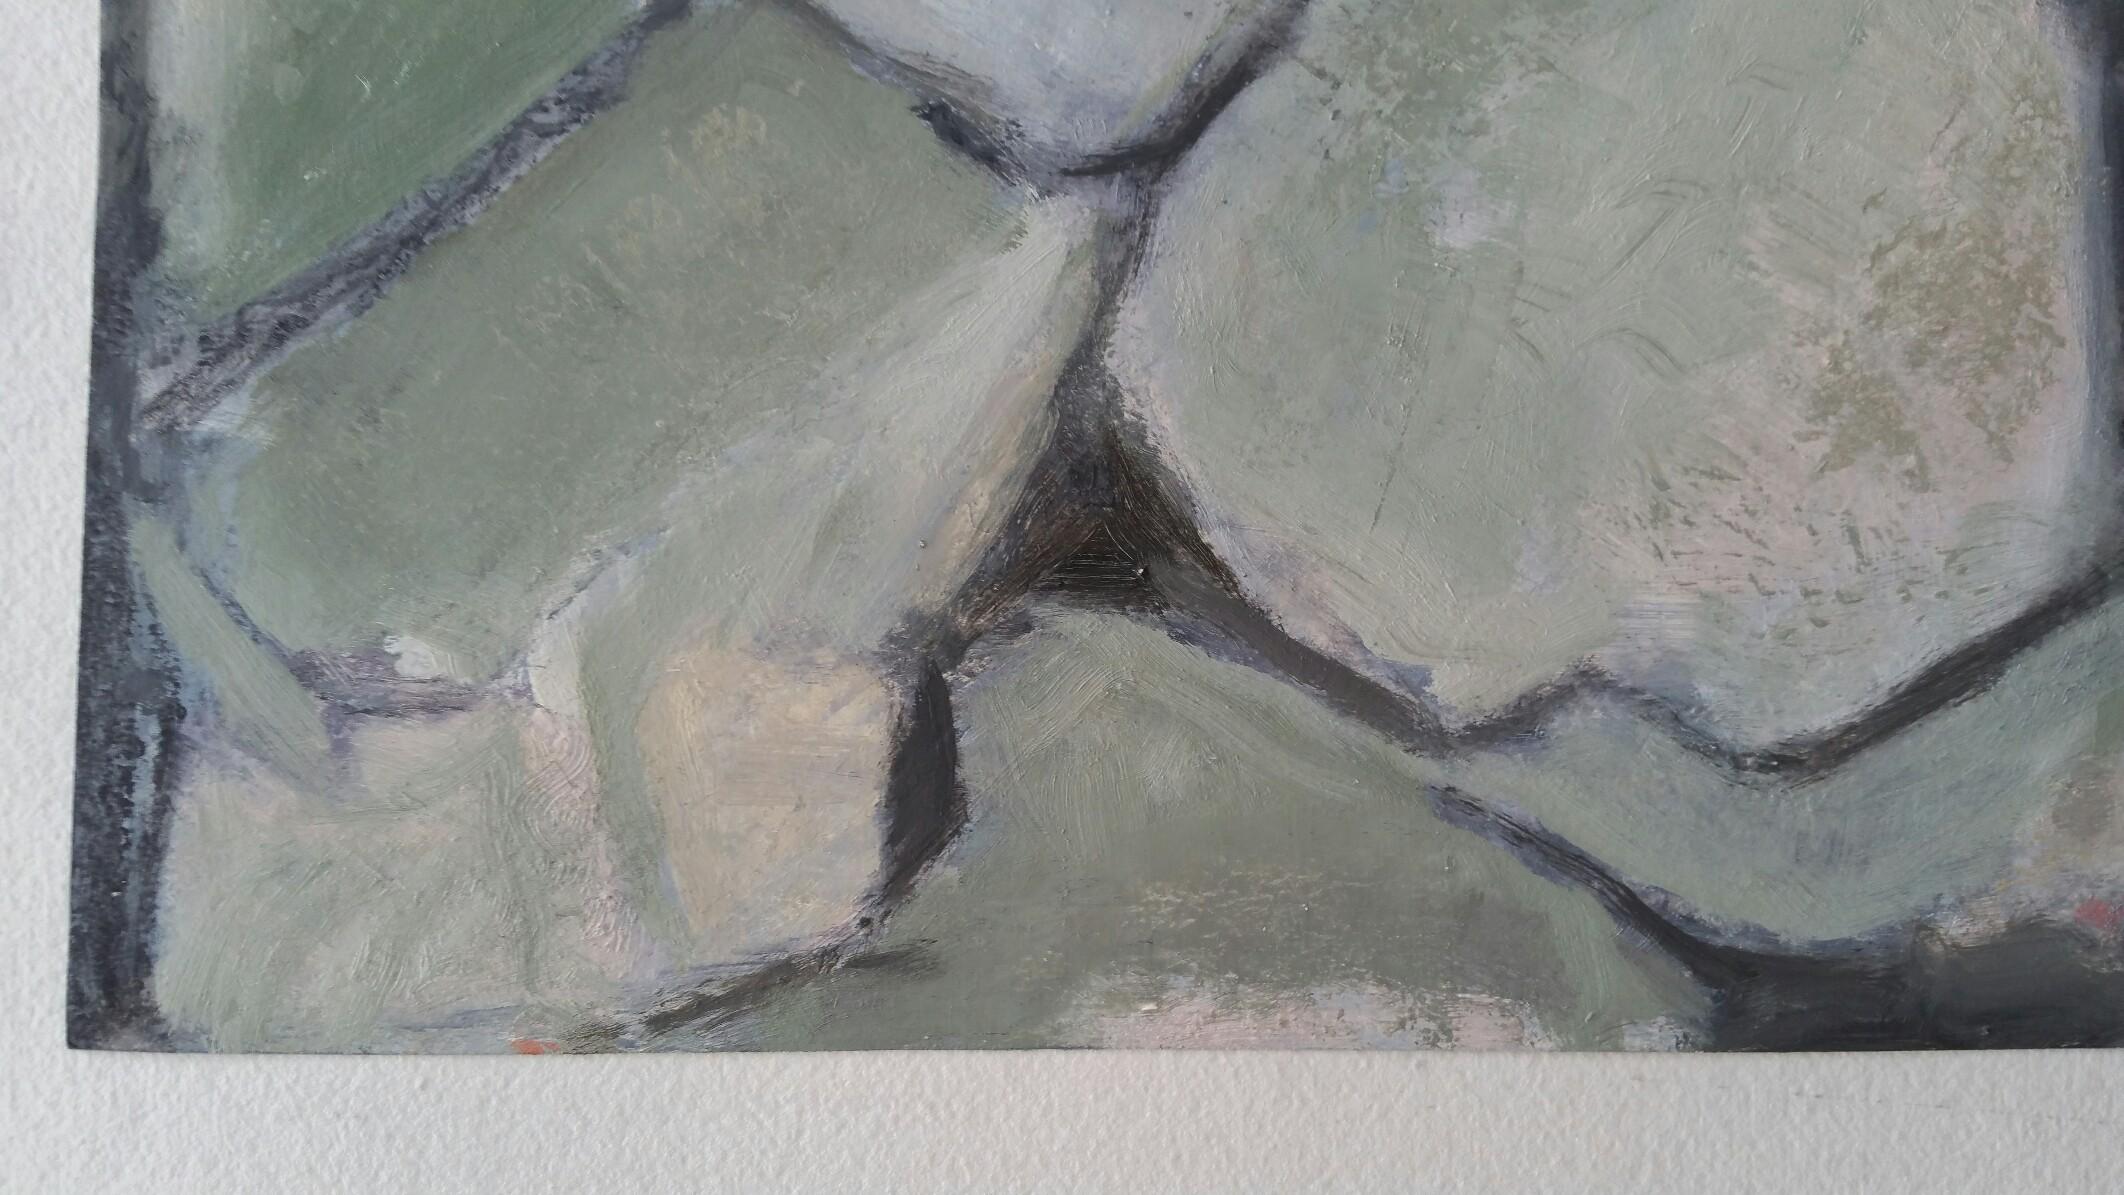 Parisian Abstract Expressionist Original Oil Painting - Small Greens Neutrals. - Gray Abstract Painting by Yvette Dubois Habasque